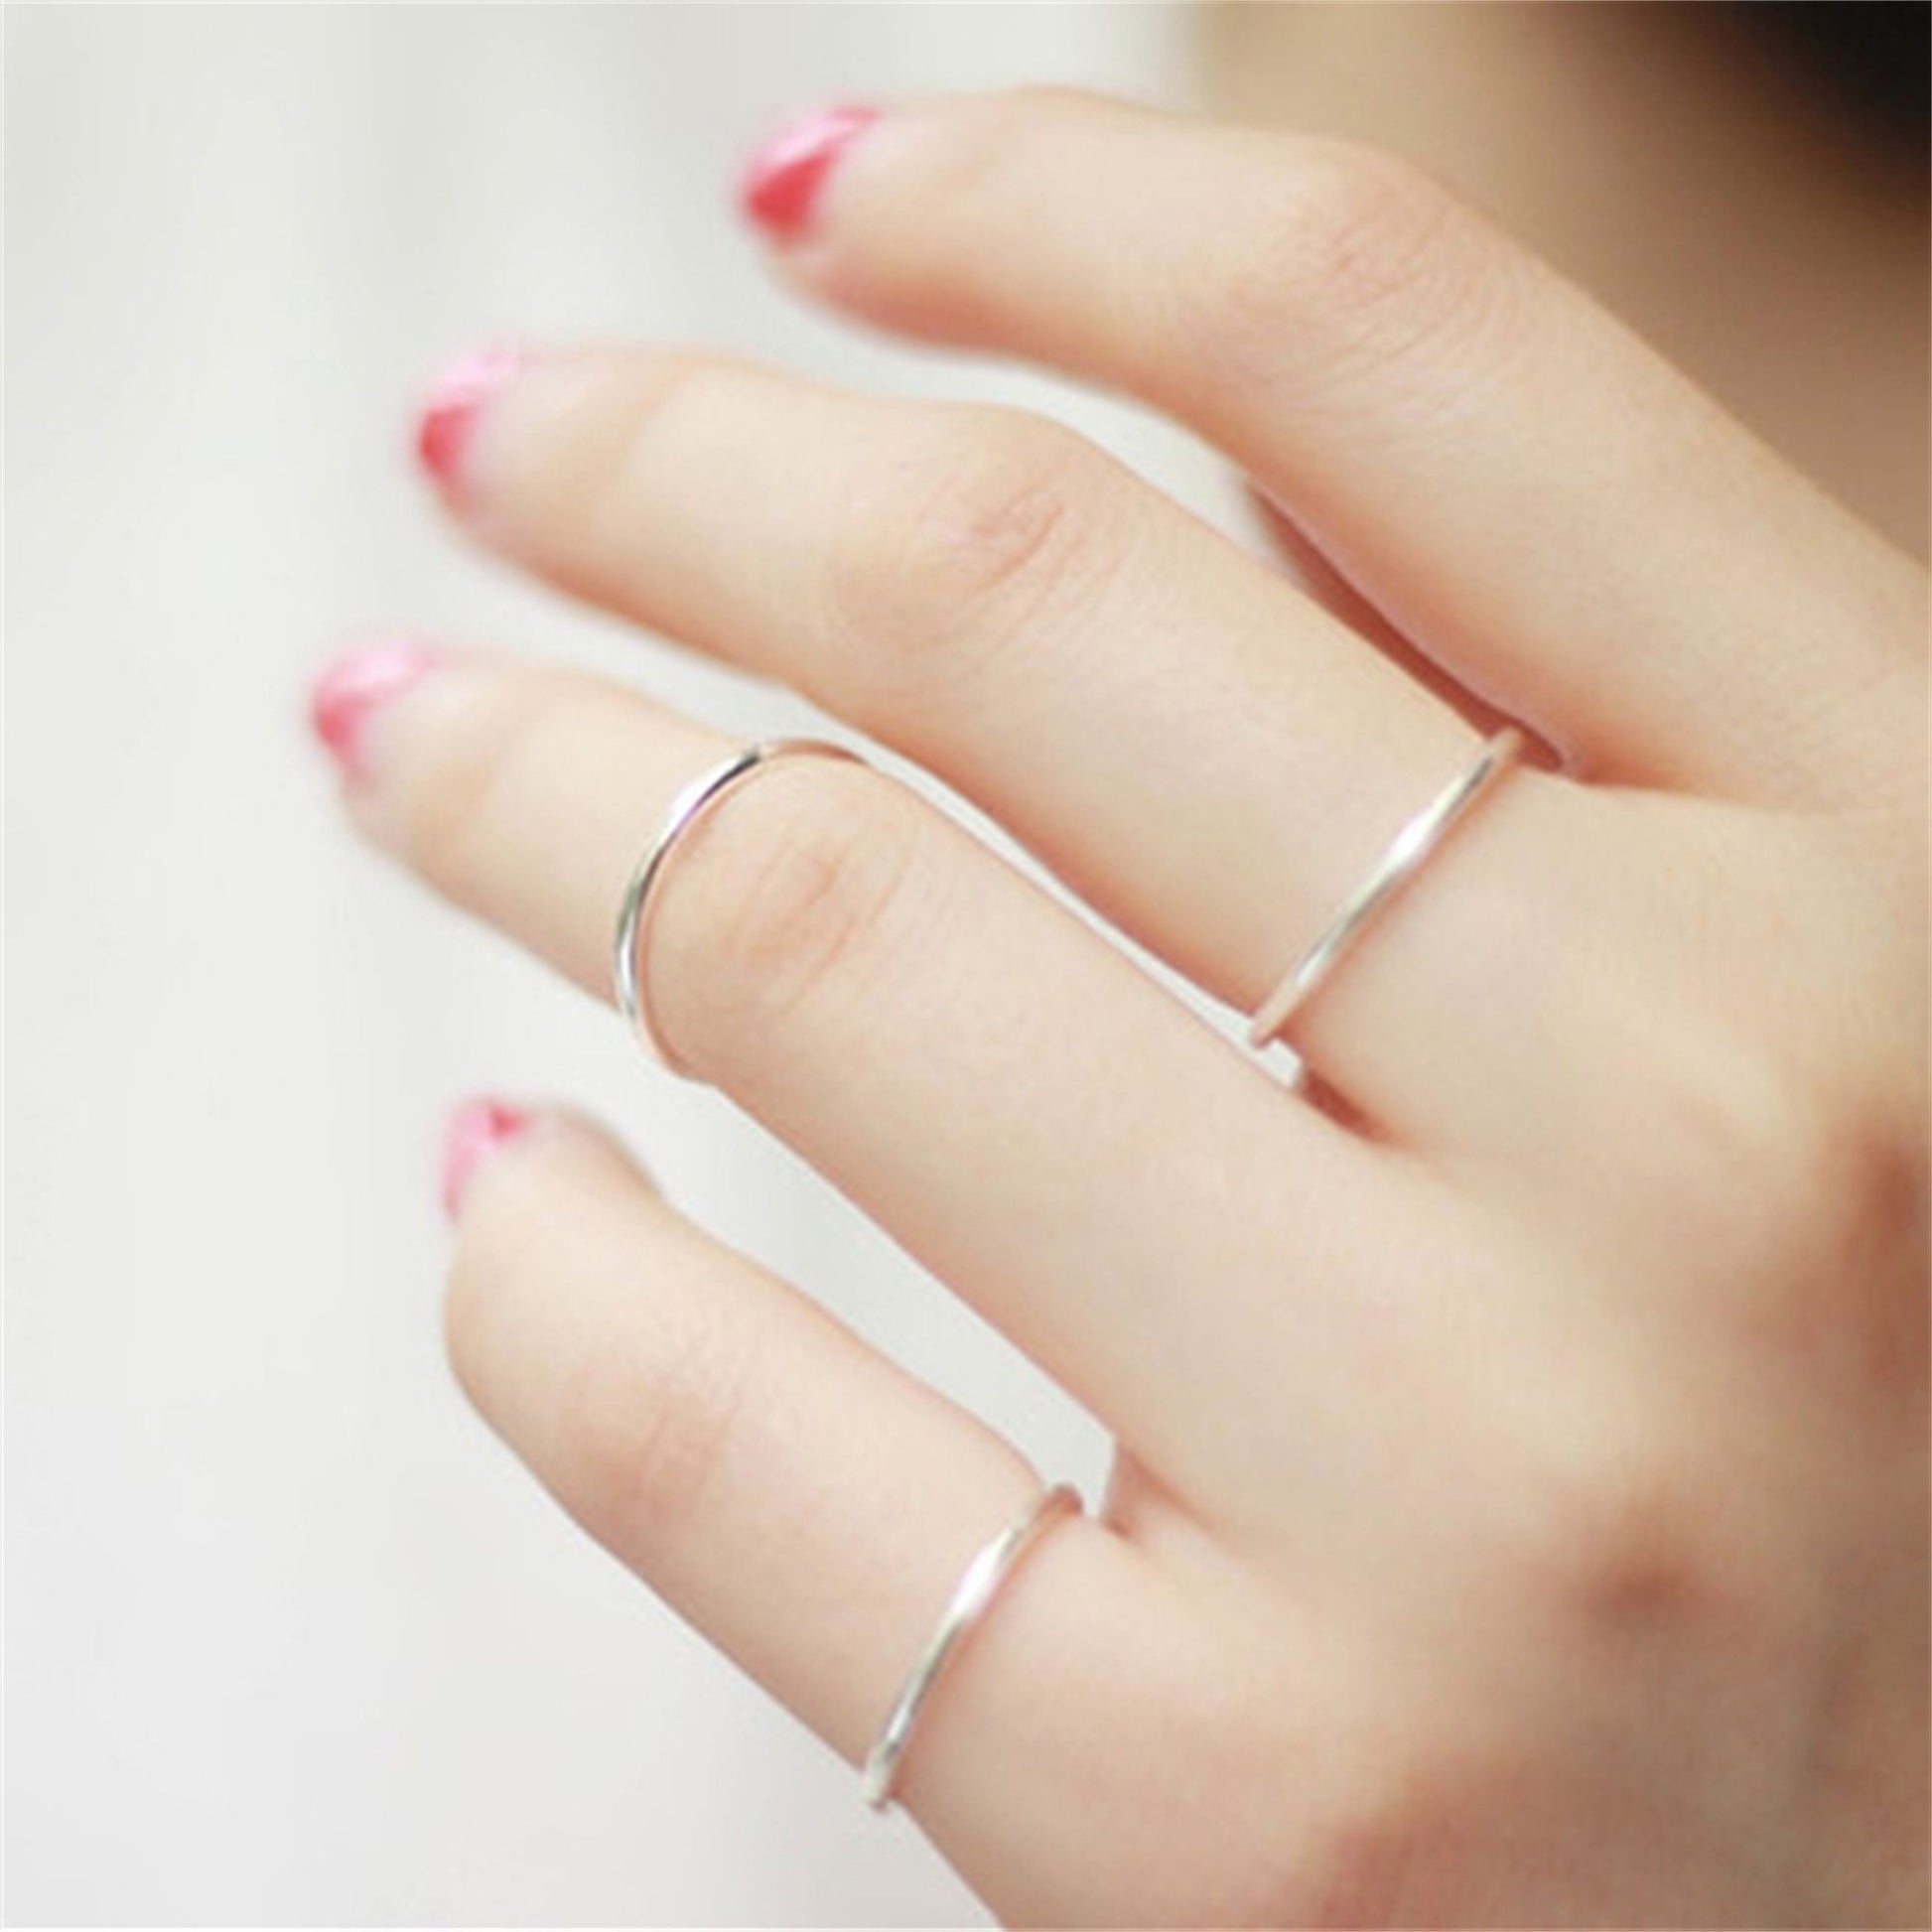 1mm Sterling Silver Skinny Round Band Stacking Rings for Women - sugarkittenlondon